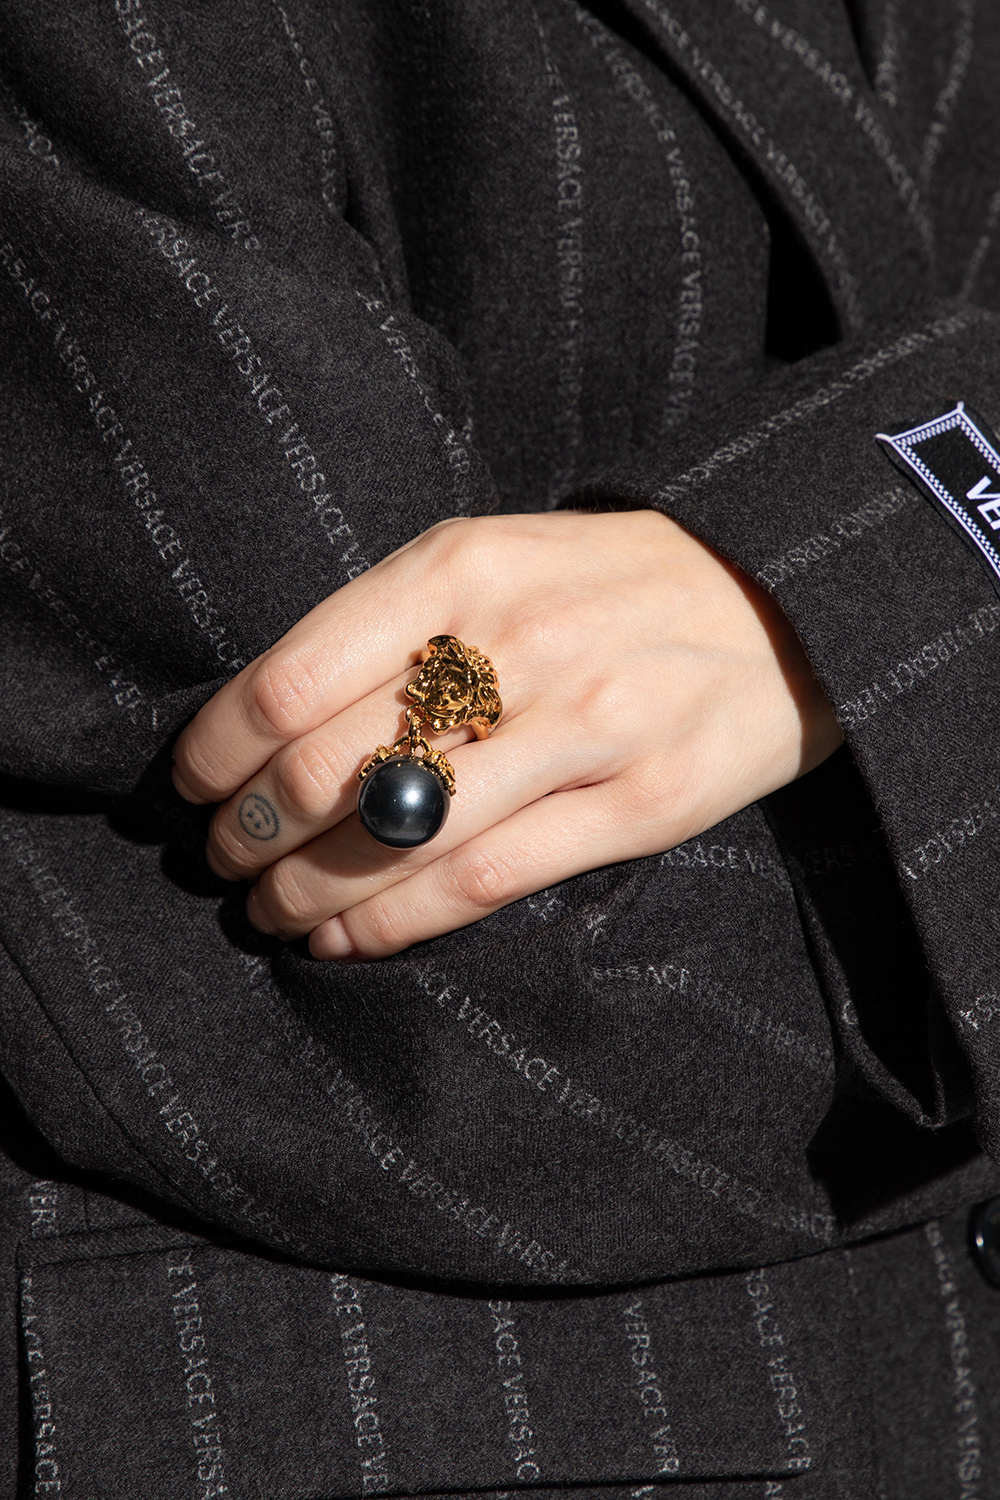 Versace Ring with Medusa